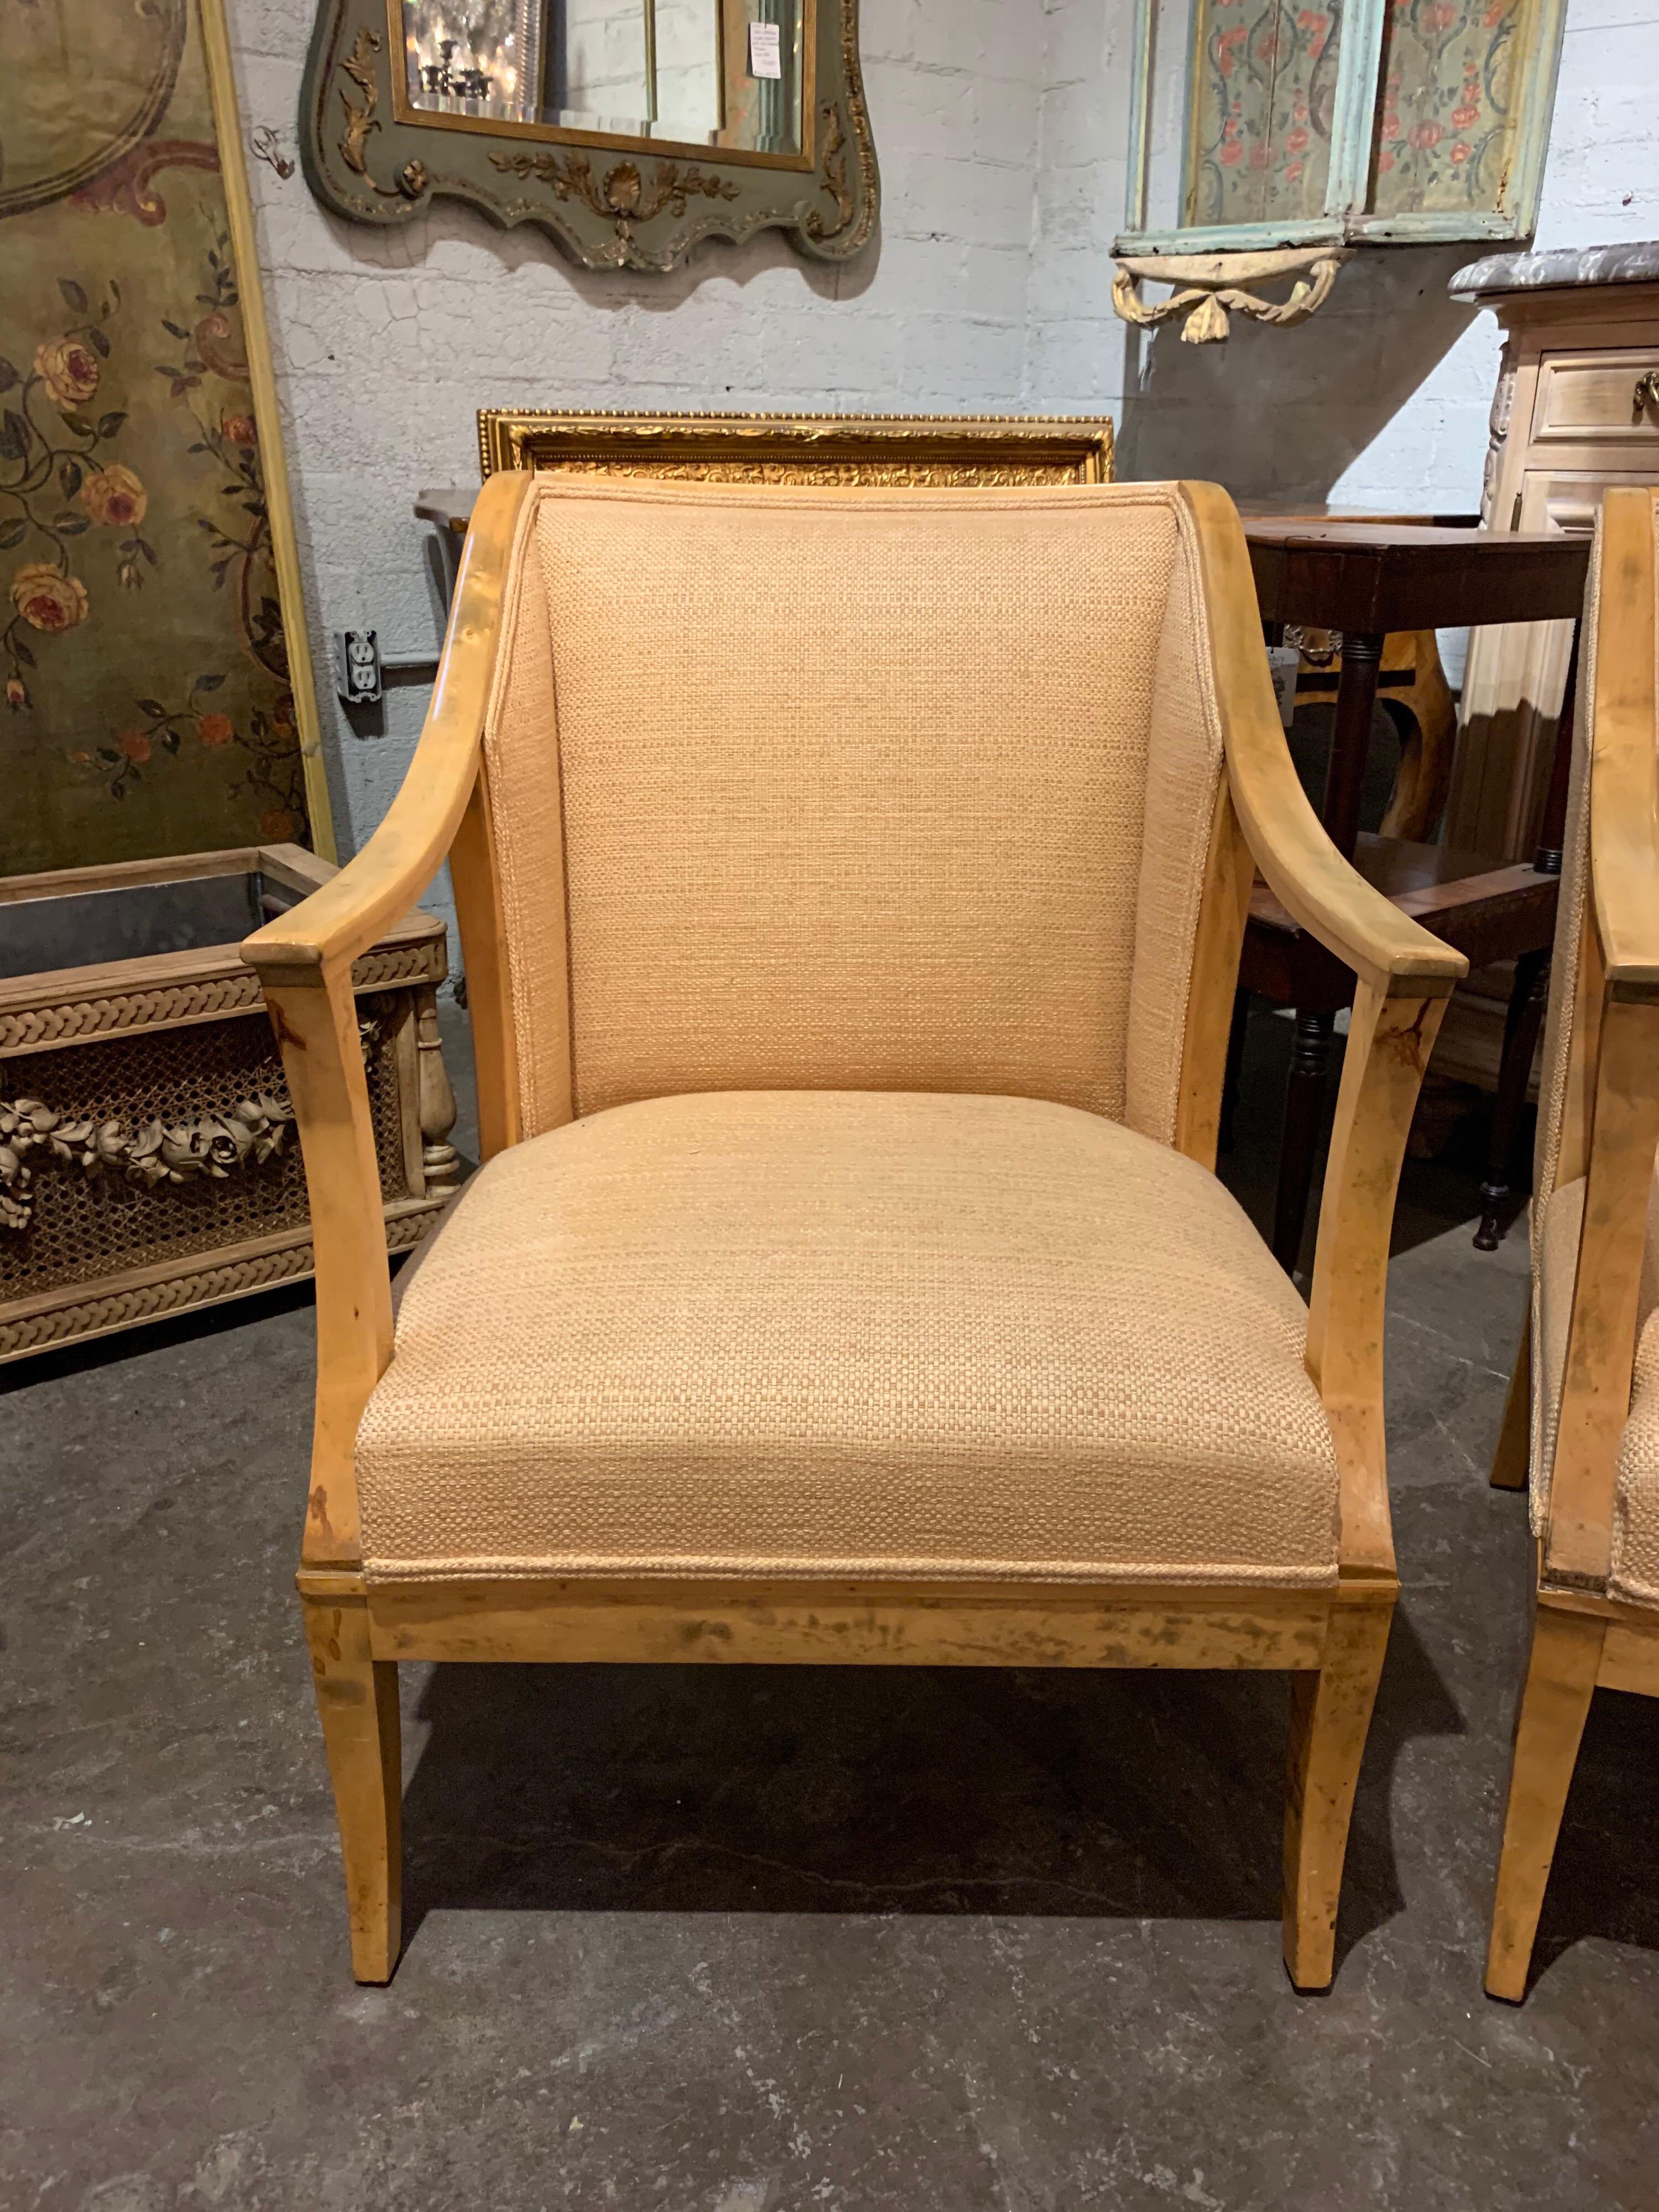 Beautiful pair of Biedermeier rock maple armchairs. The chairs are upholstered in a very fine woven gold colored fabric. A classic style that could be mixed with a variety of decors. Comfortable as well!